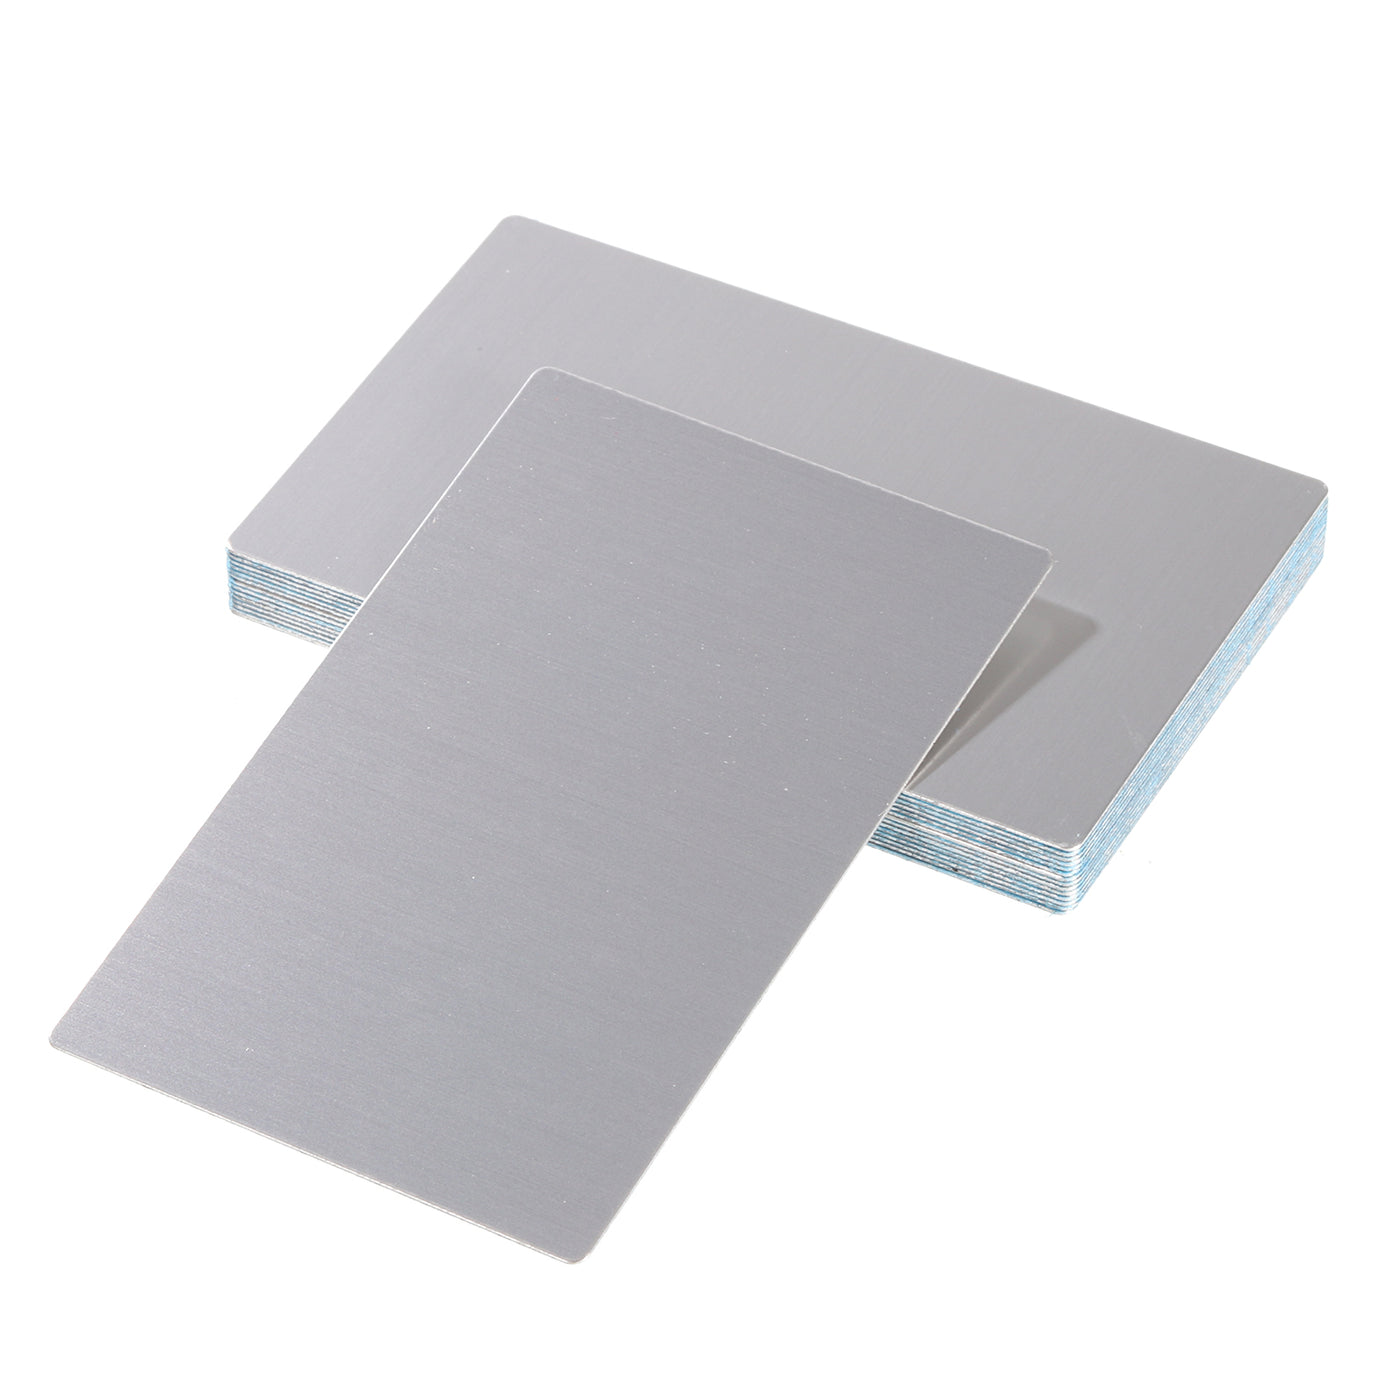 uxcell Uxcell 15Pcs 80 x 50 x 0.5mm Anodized Aluminum Blank Metal Business Cards, Silver